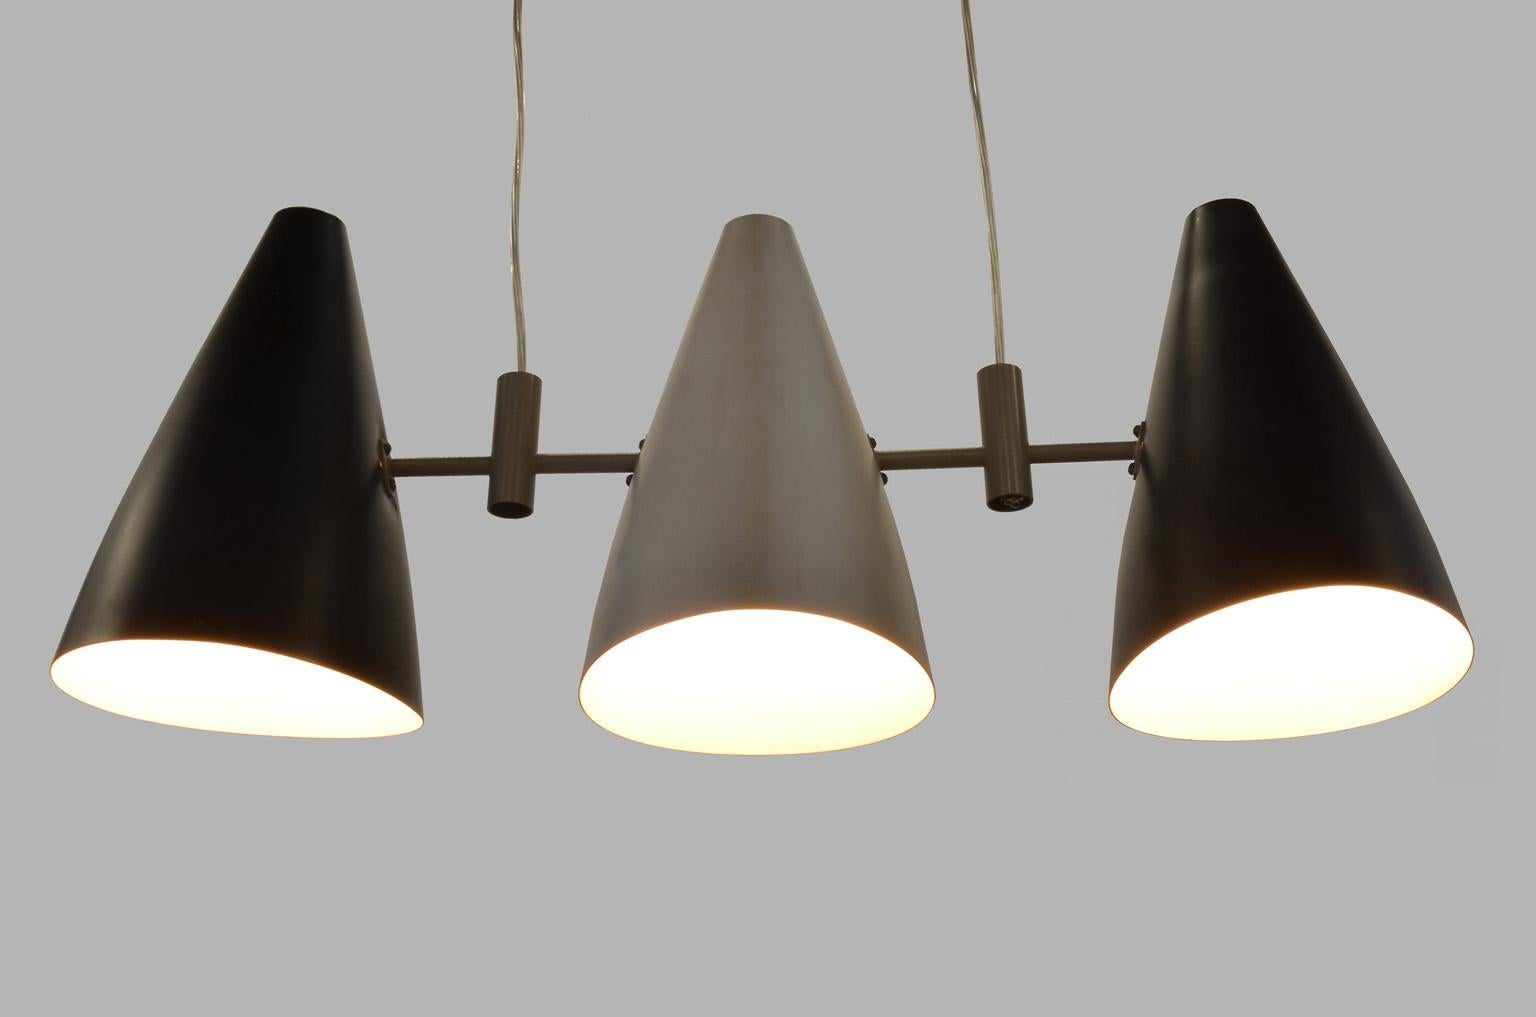 Italian Pendant Lamp with Three Lights, 1950s, Lacquered in Black and Gray (Moderne der Mitte des Jahrhunderts) im Angebot